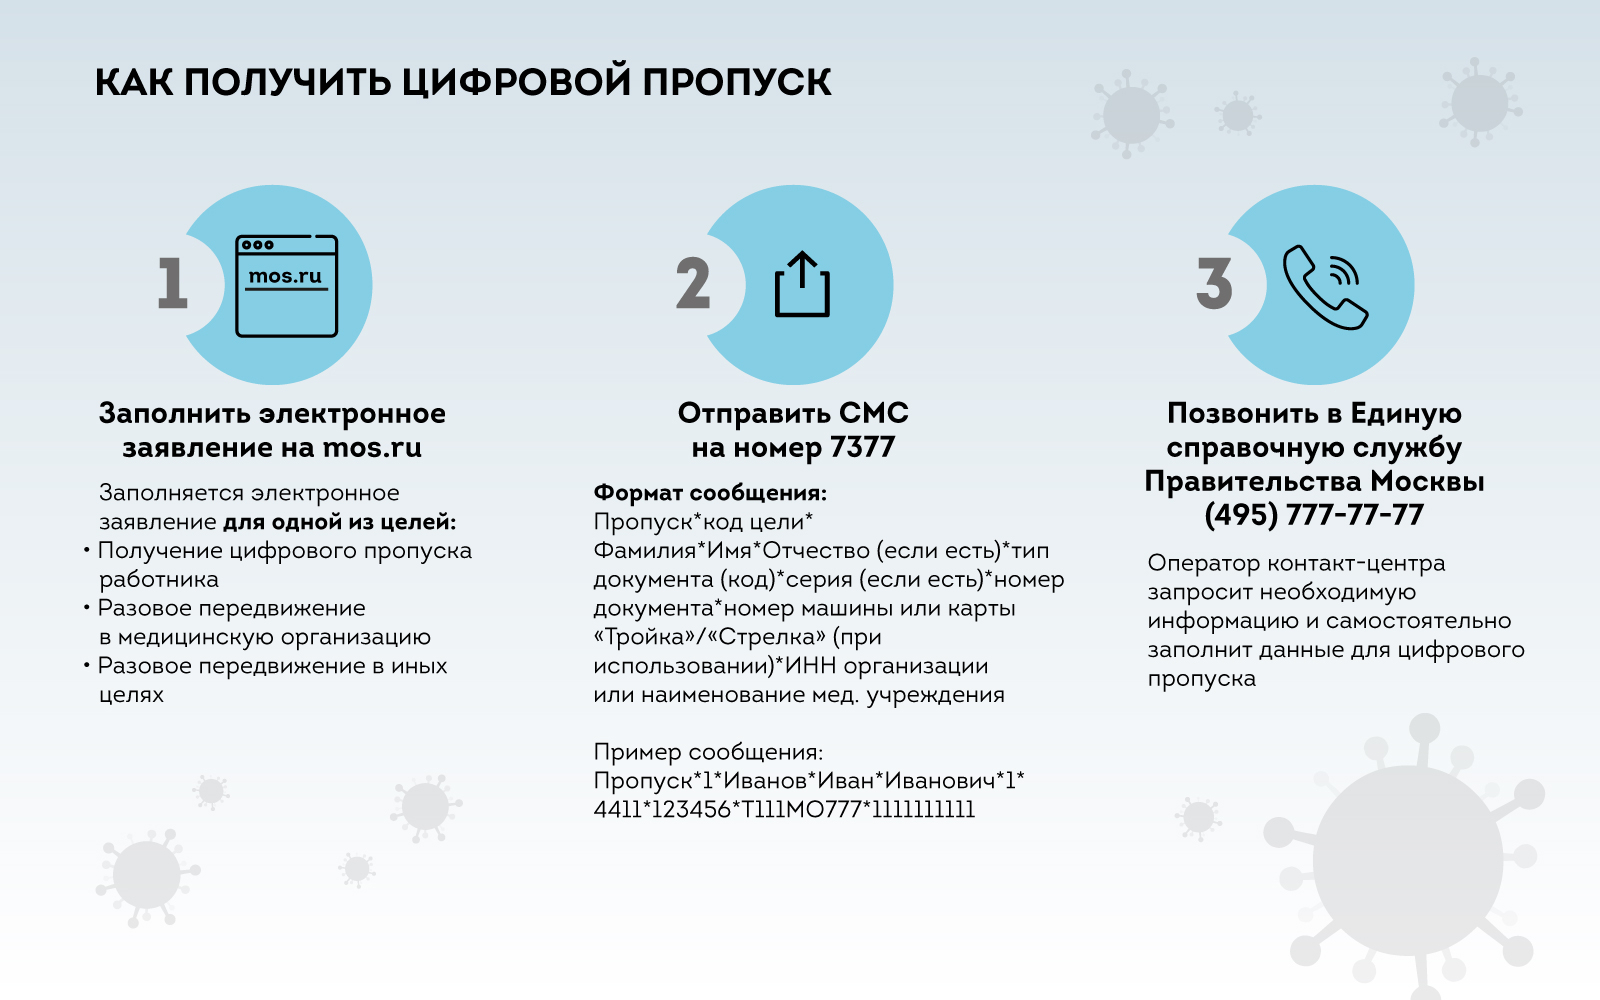 Everything you need to know about digital passes in Moscow - Moscow, Coronavirus, Skip, Self-isolation, TVNZ, Twitter, Information, Longpost